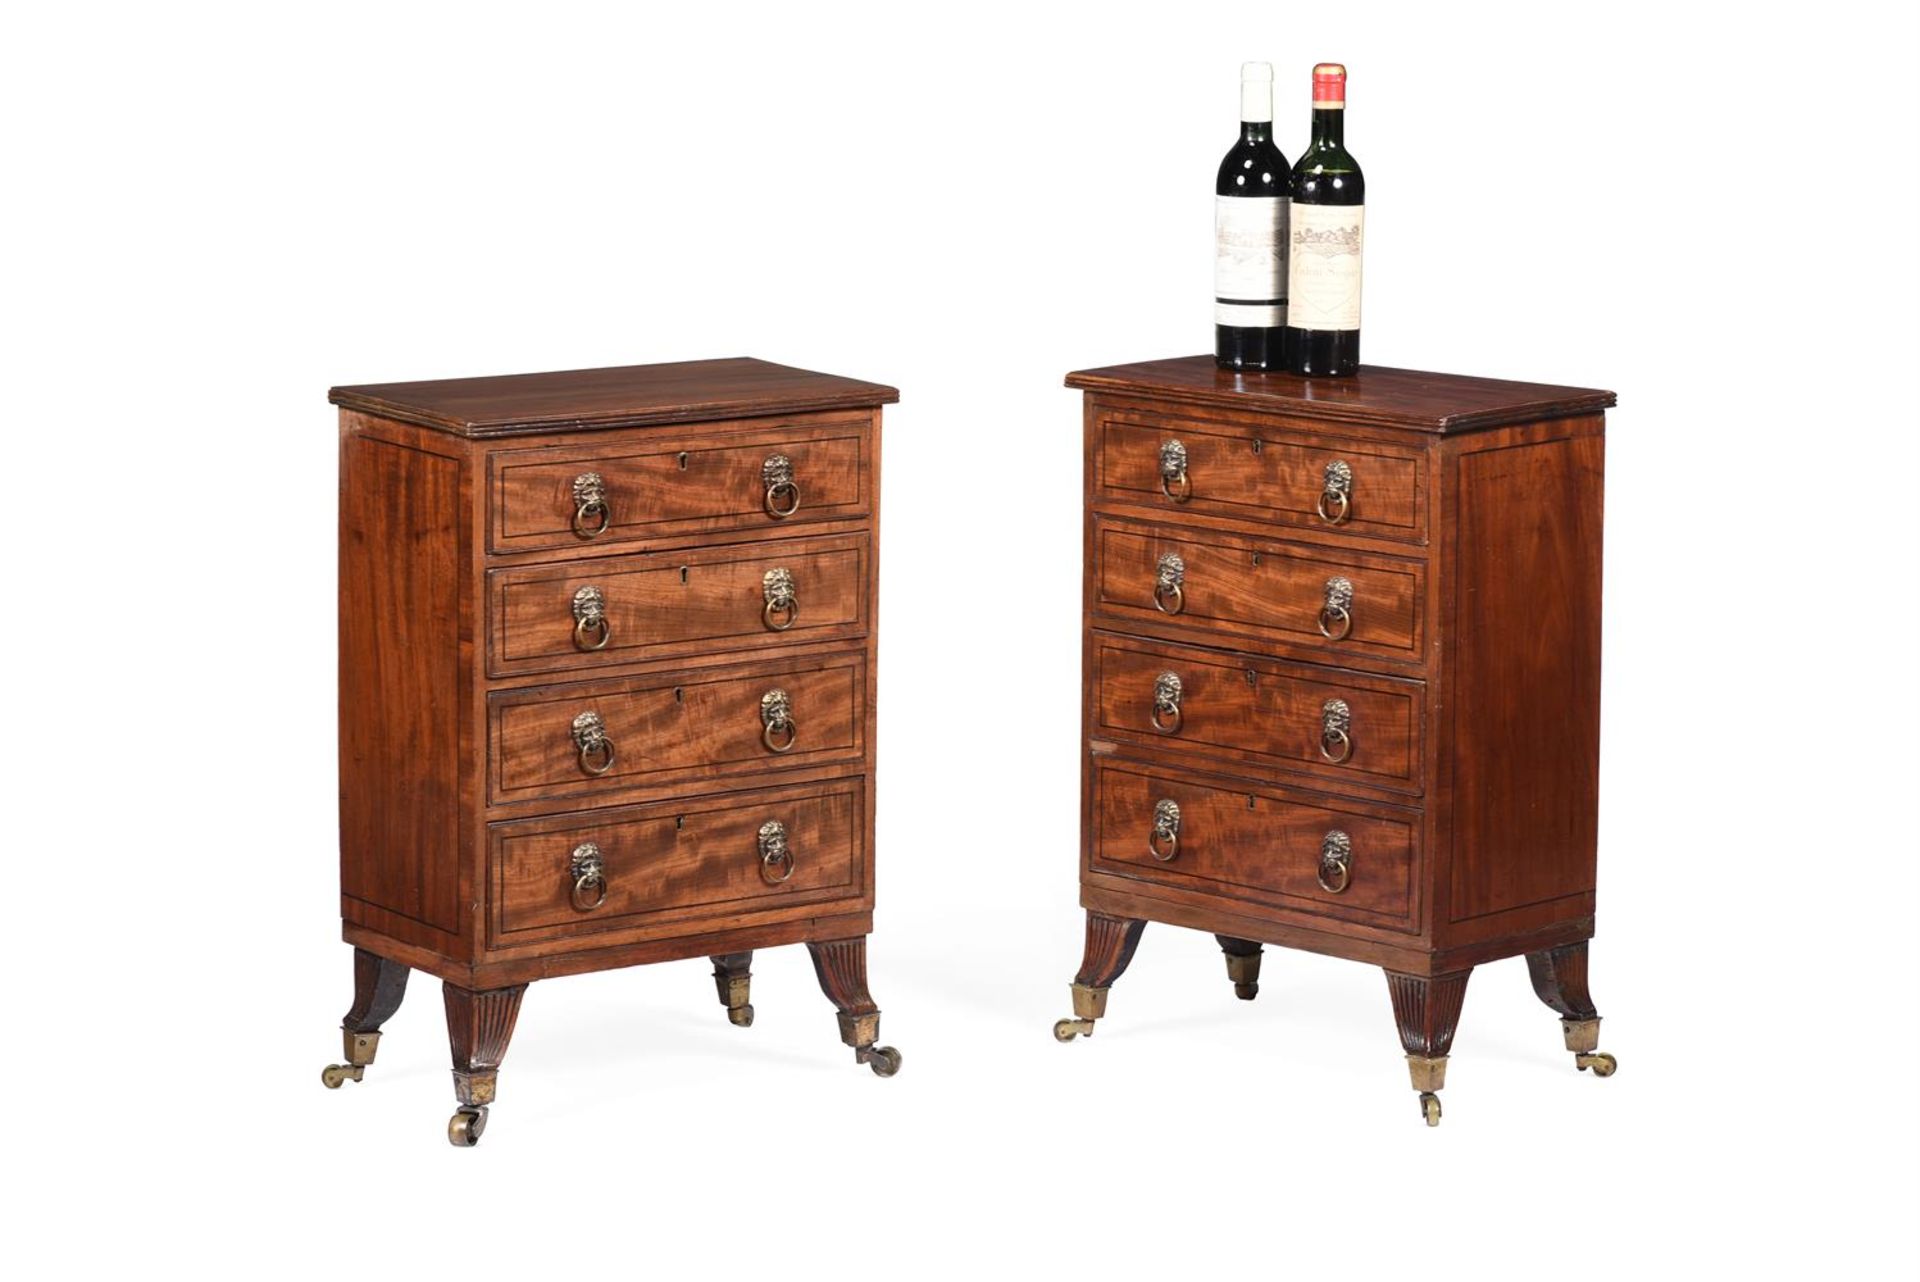 Y A PAIR OF MAHOGANY AND EBONY STRUNG SMALL CHESTS, EARLY 19TH CENTURY AND LATER